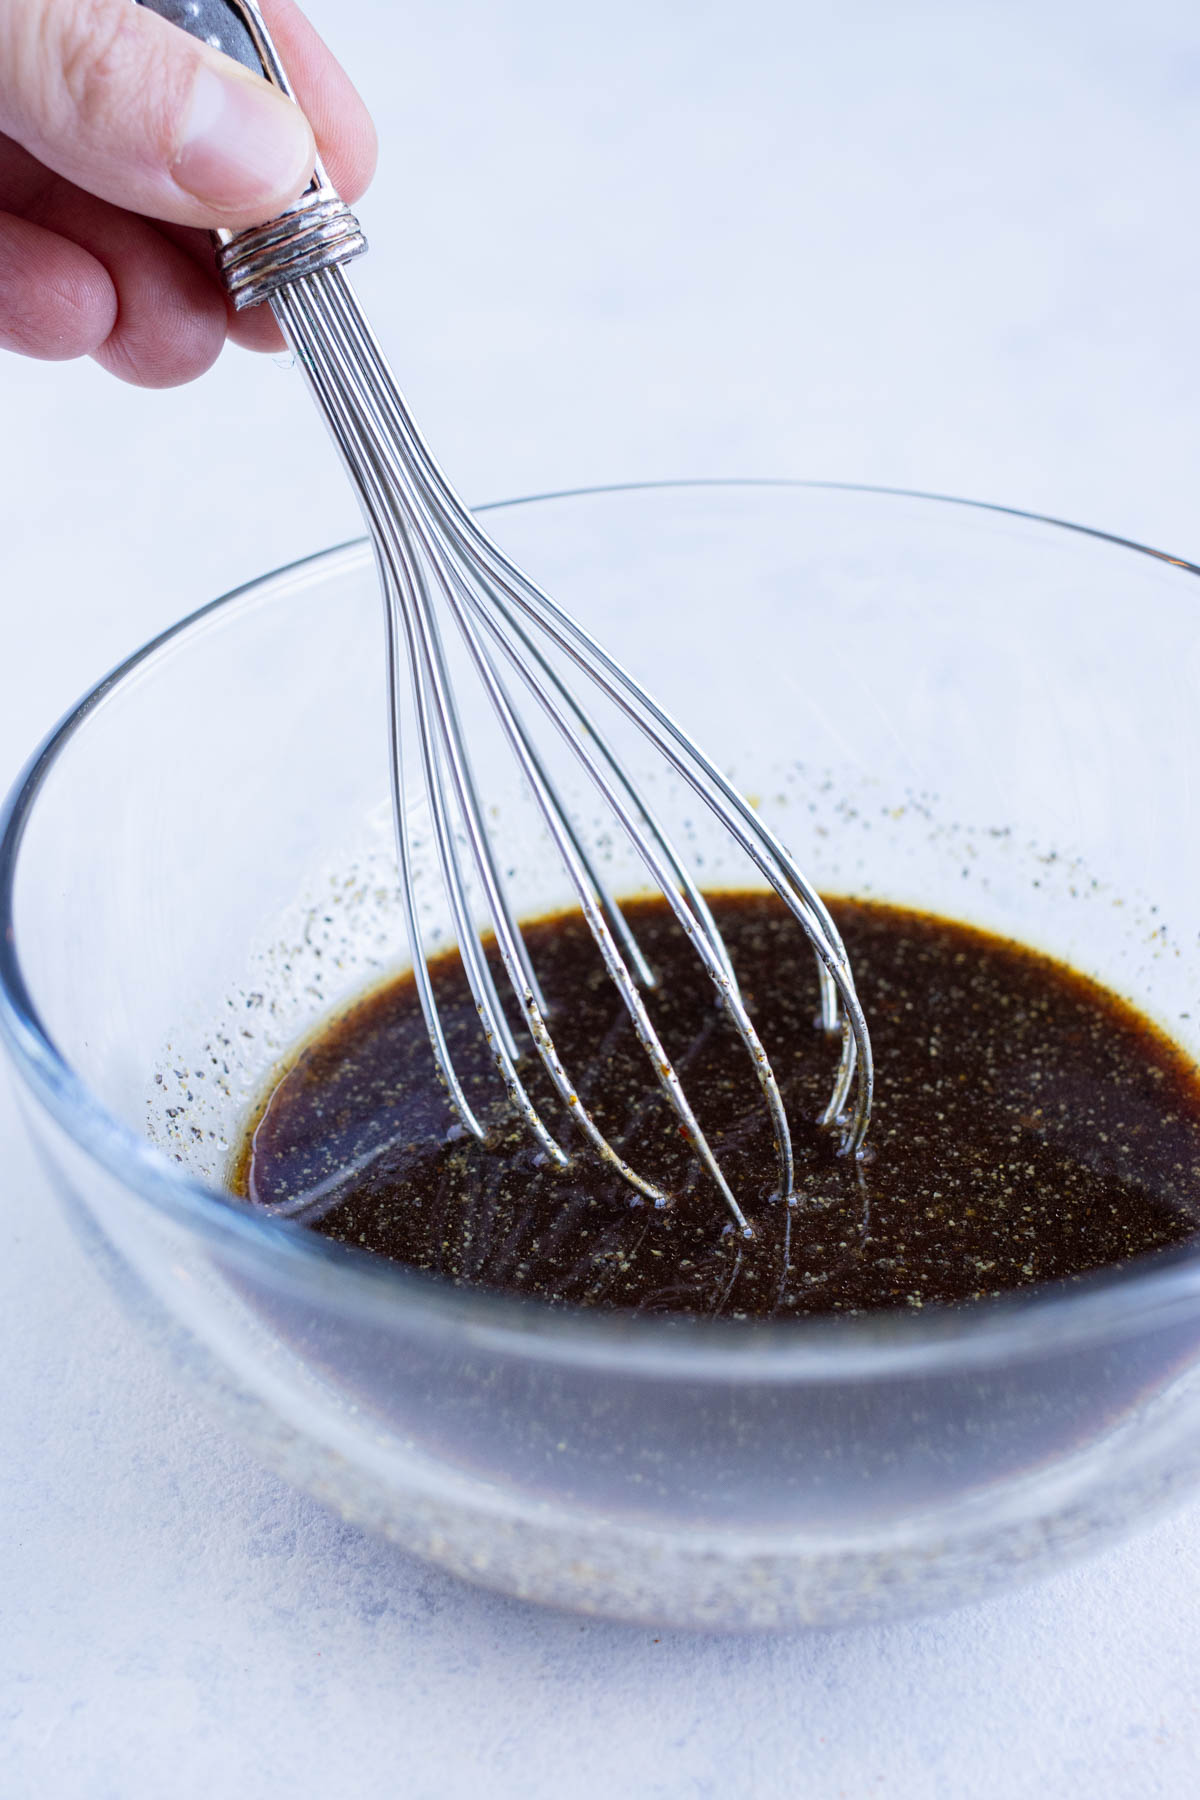 Sauce ingredients are mixed together in a bowl with a whisk.